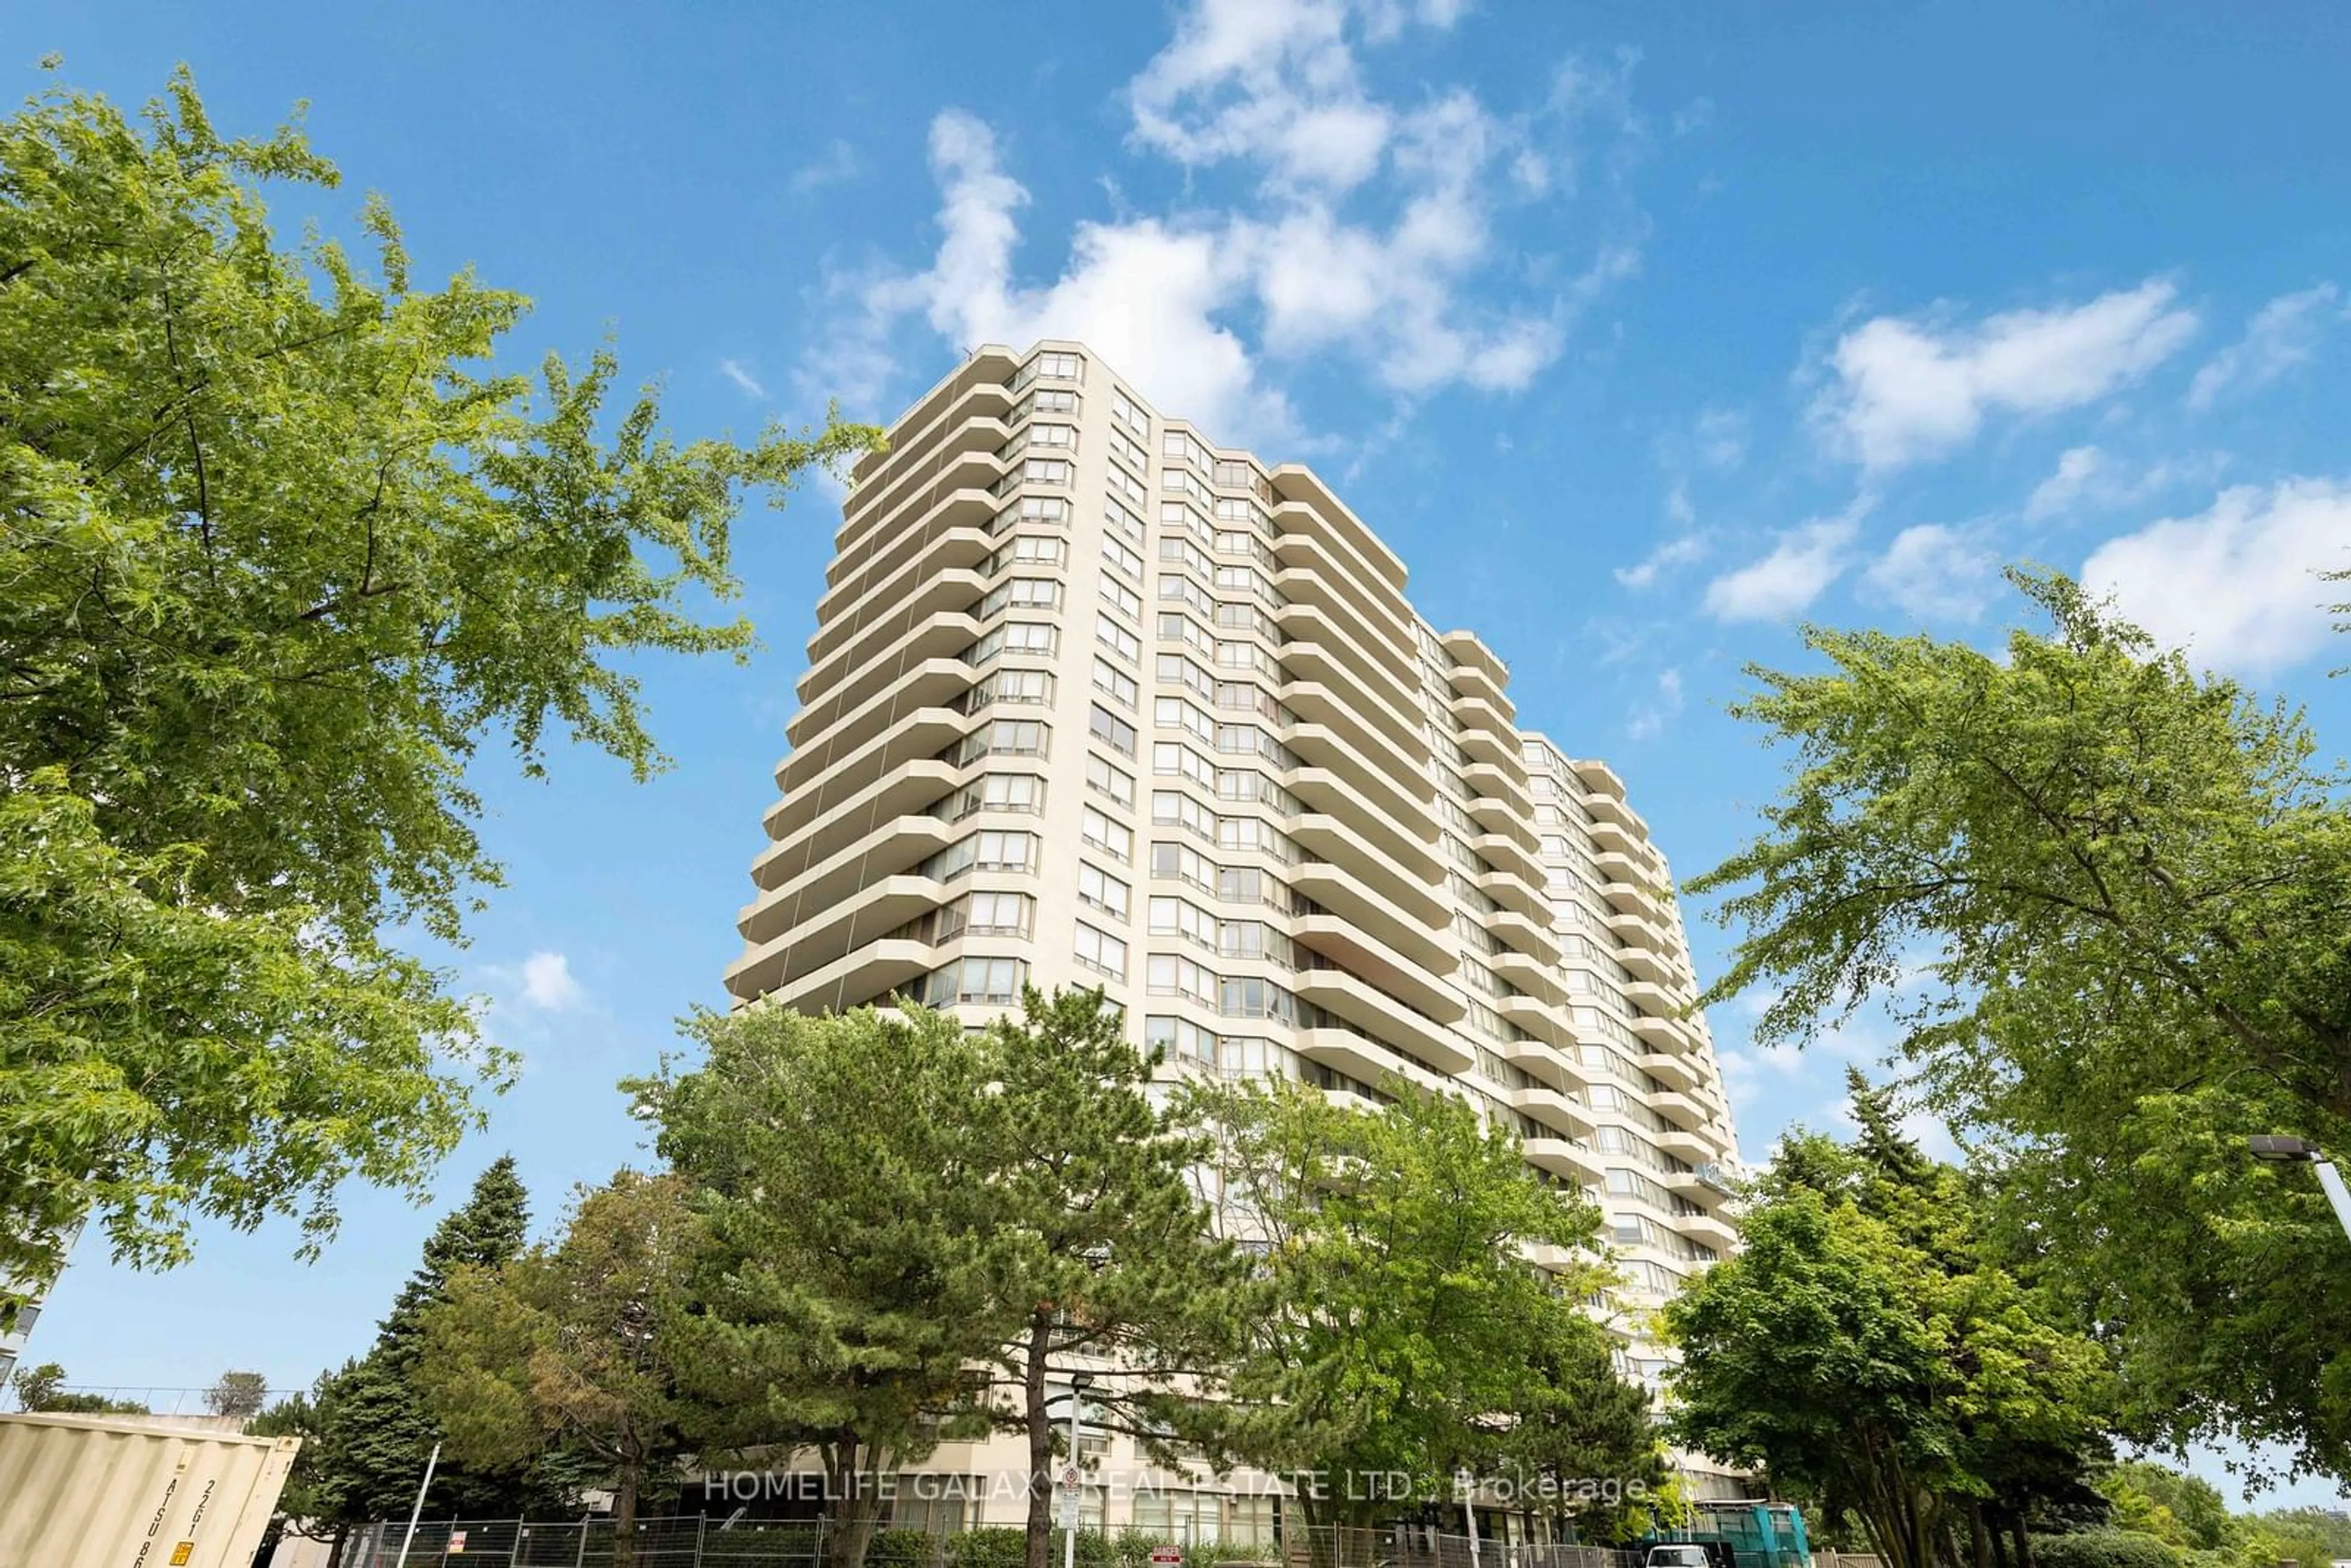 A pic from exterior of the house or condo for 1 Greystone Walk Dr #884, Toronto Ontario M1K 5J3